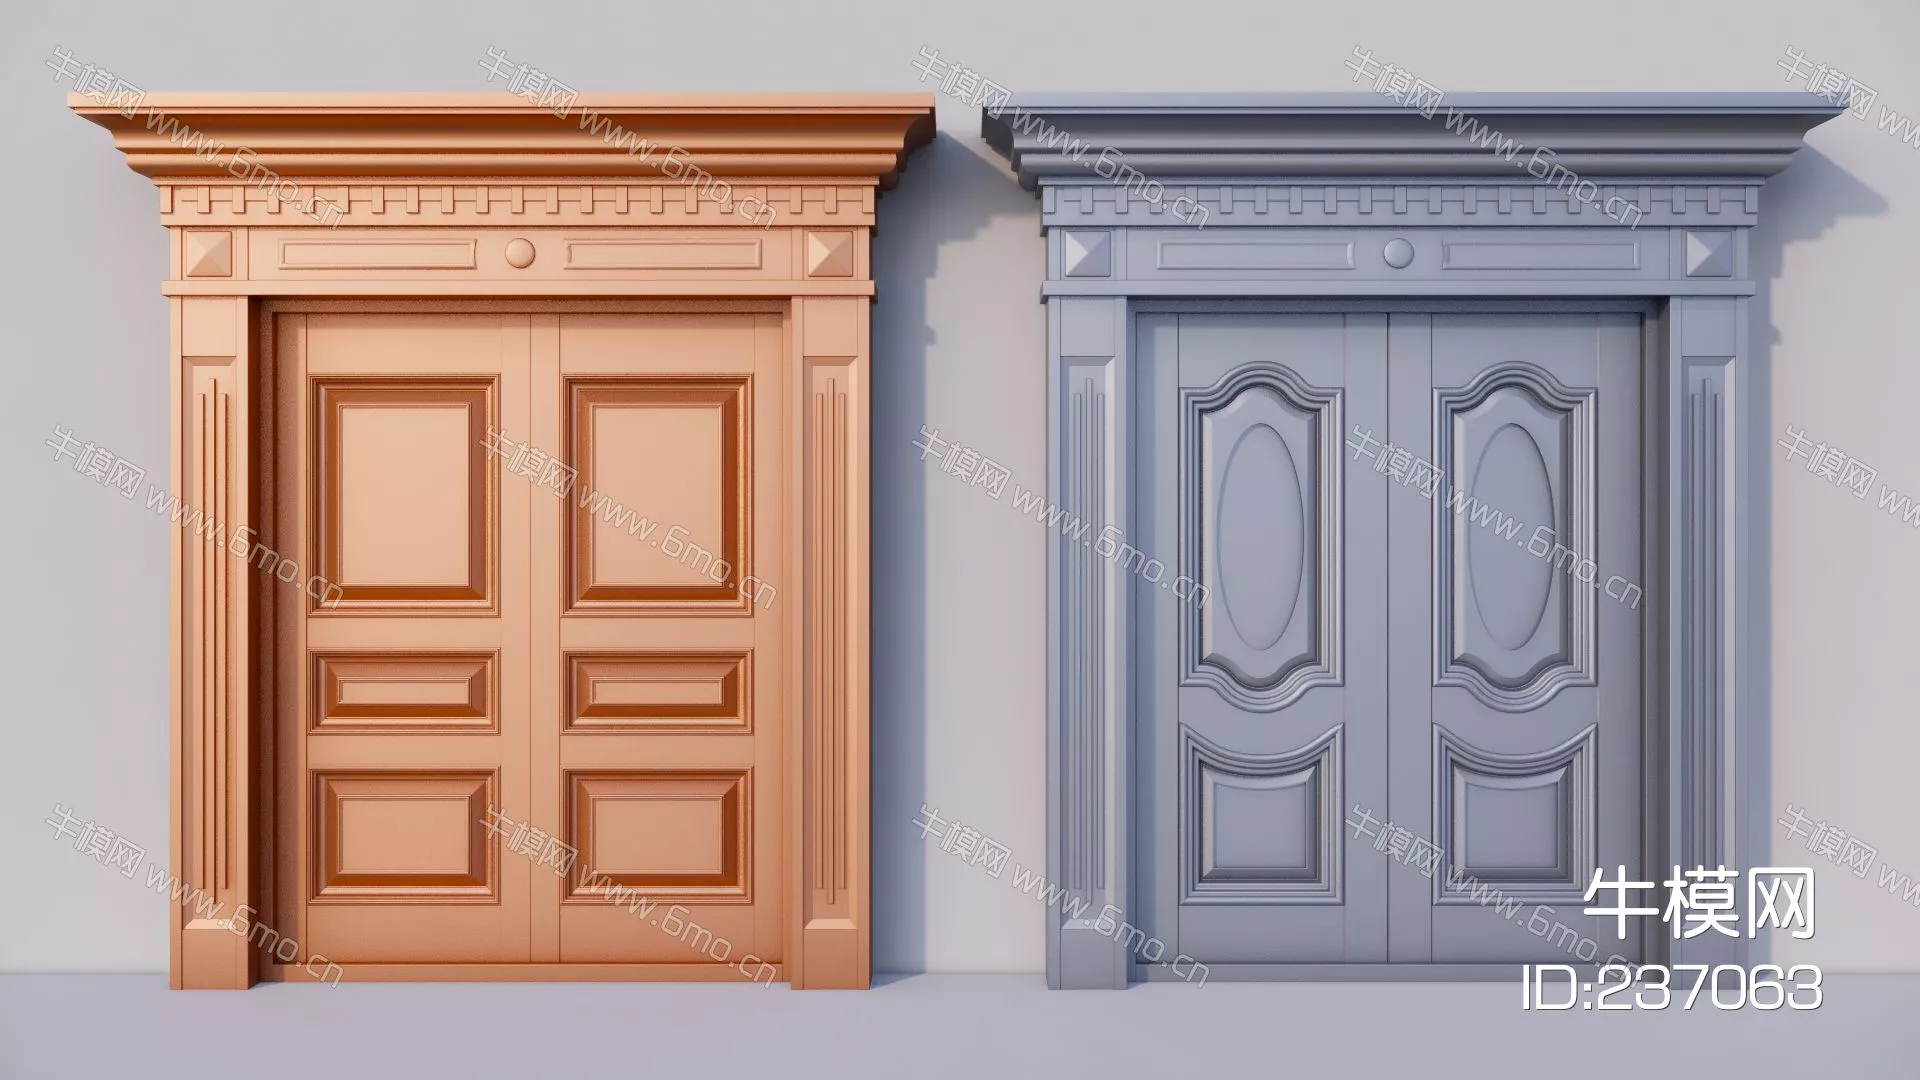 CHINESE DOOR AND WINDOWS - SKETCHUP 3D MODEL - ENSCAPE - 237063